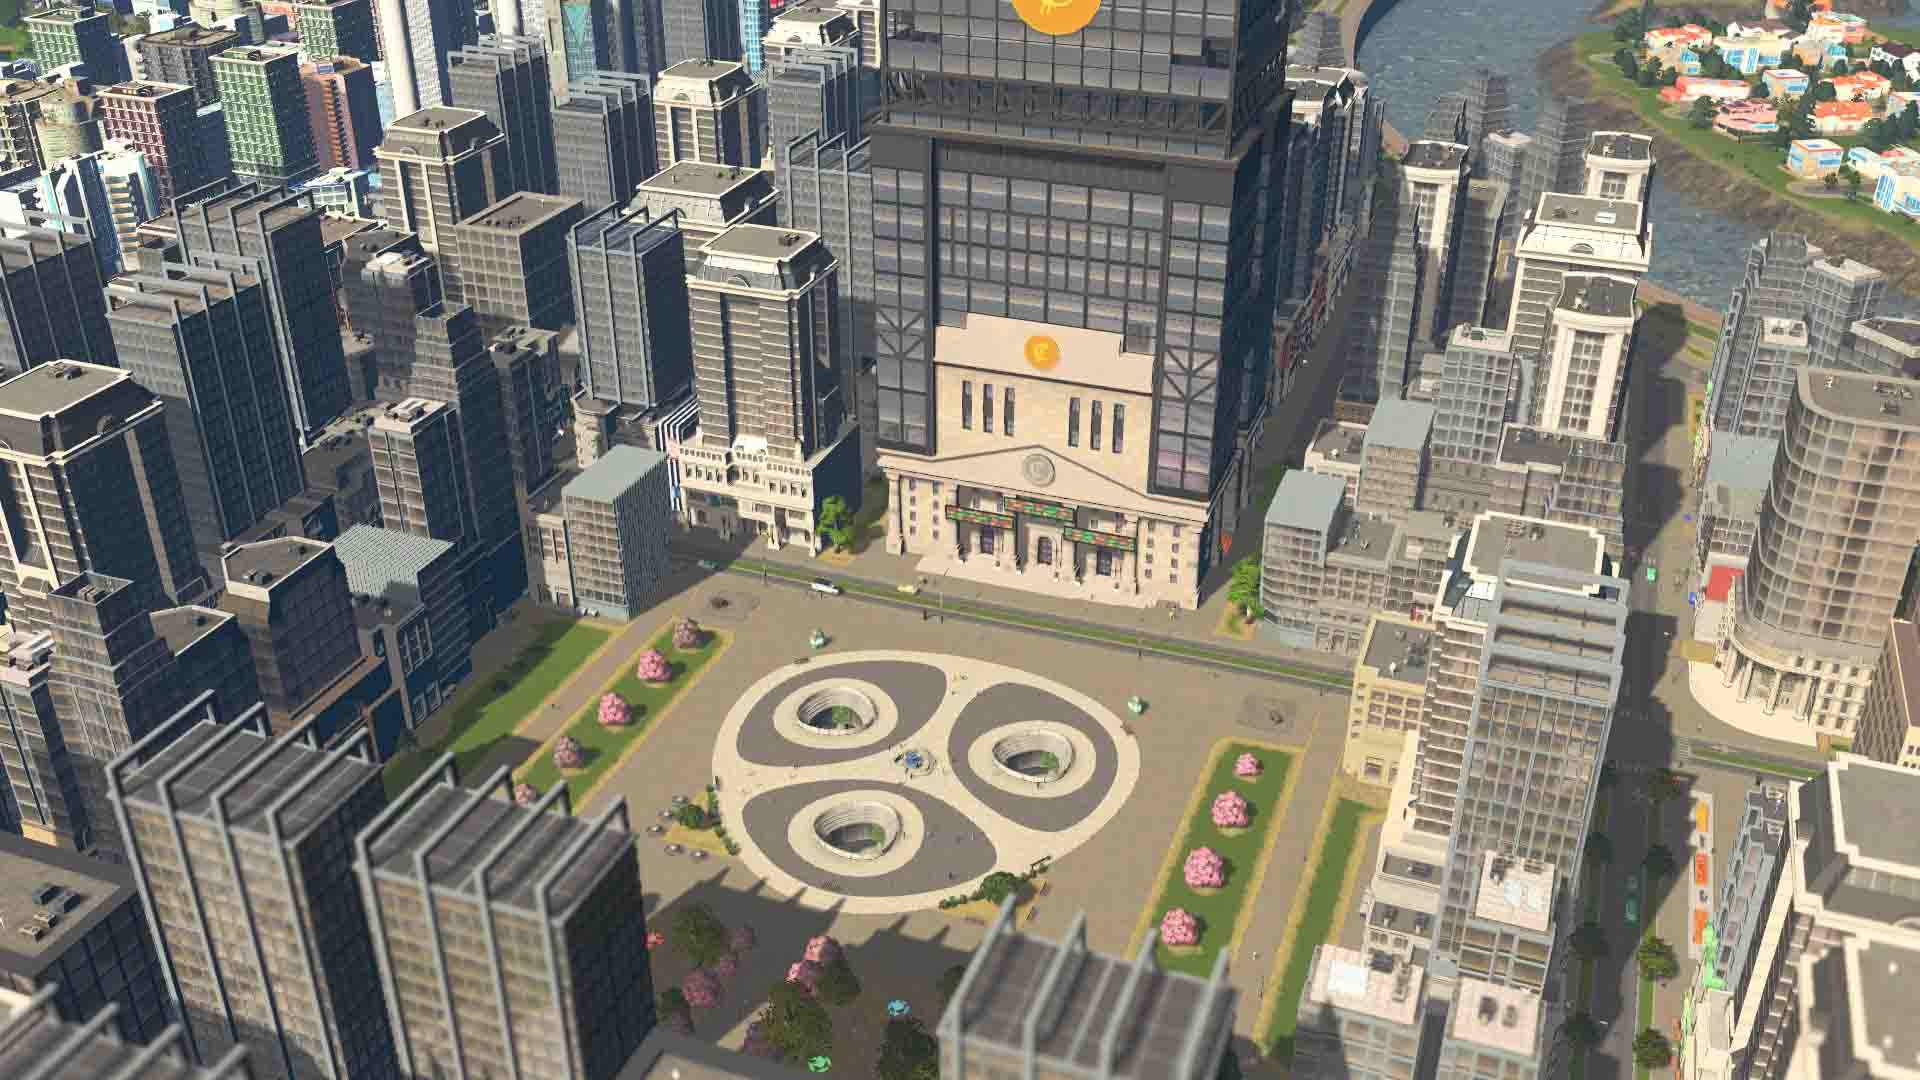 Cities: Skylines - Financial Districts is today on PC and consoles